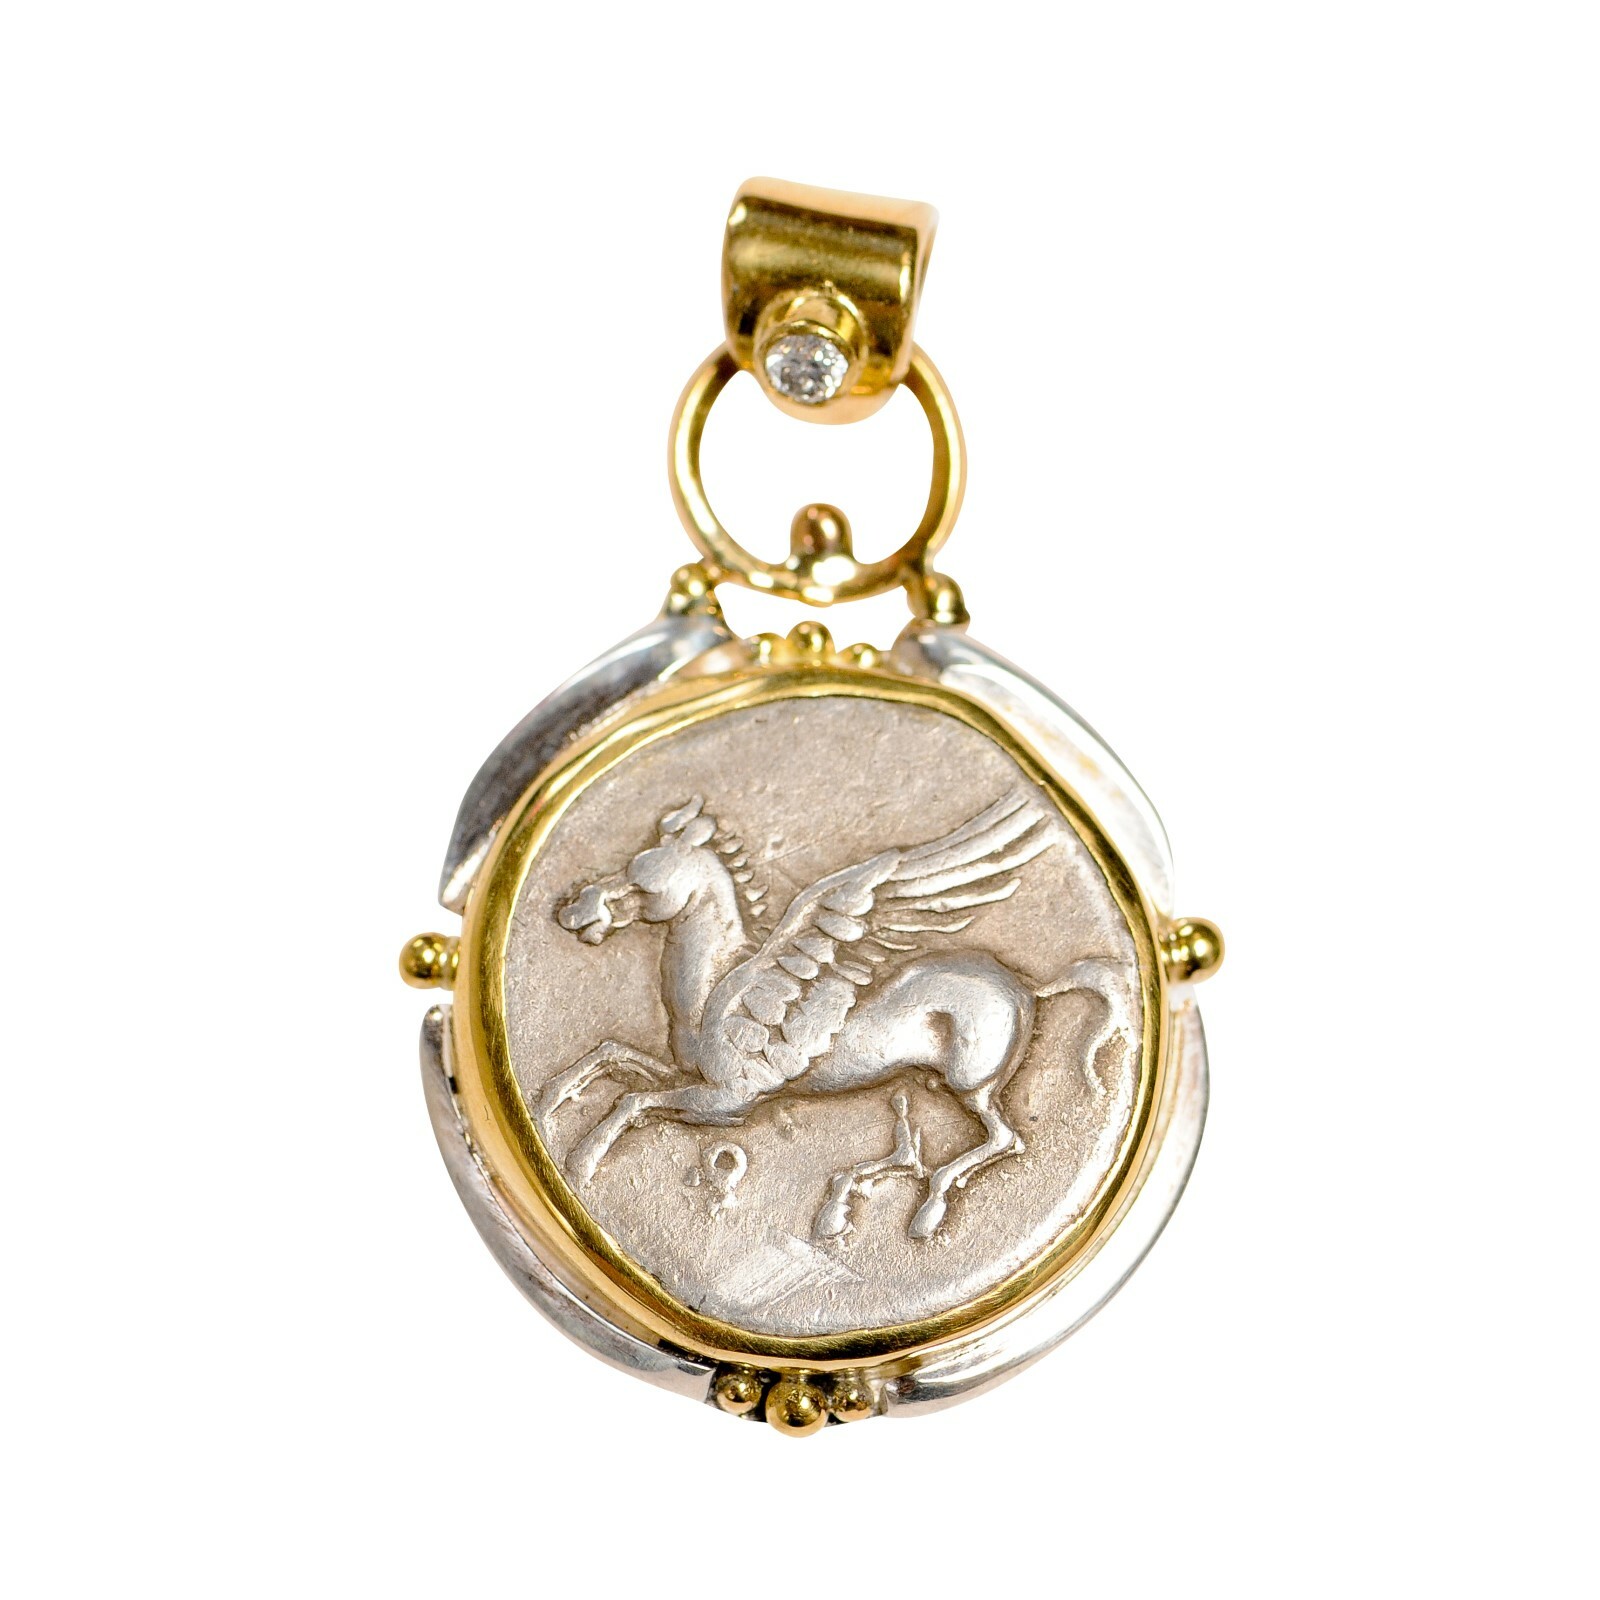 Ancient Pegasus Coin in 22 kt Gold Pendant